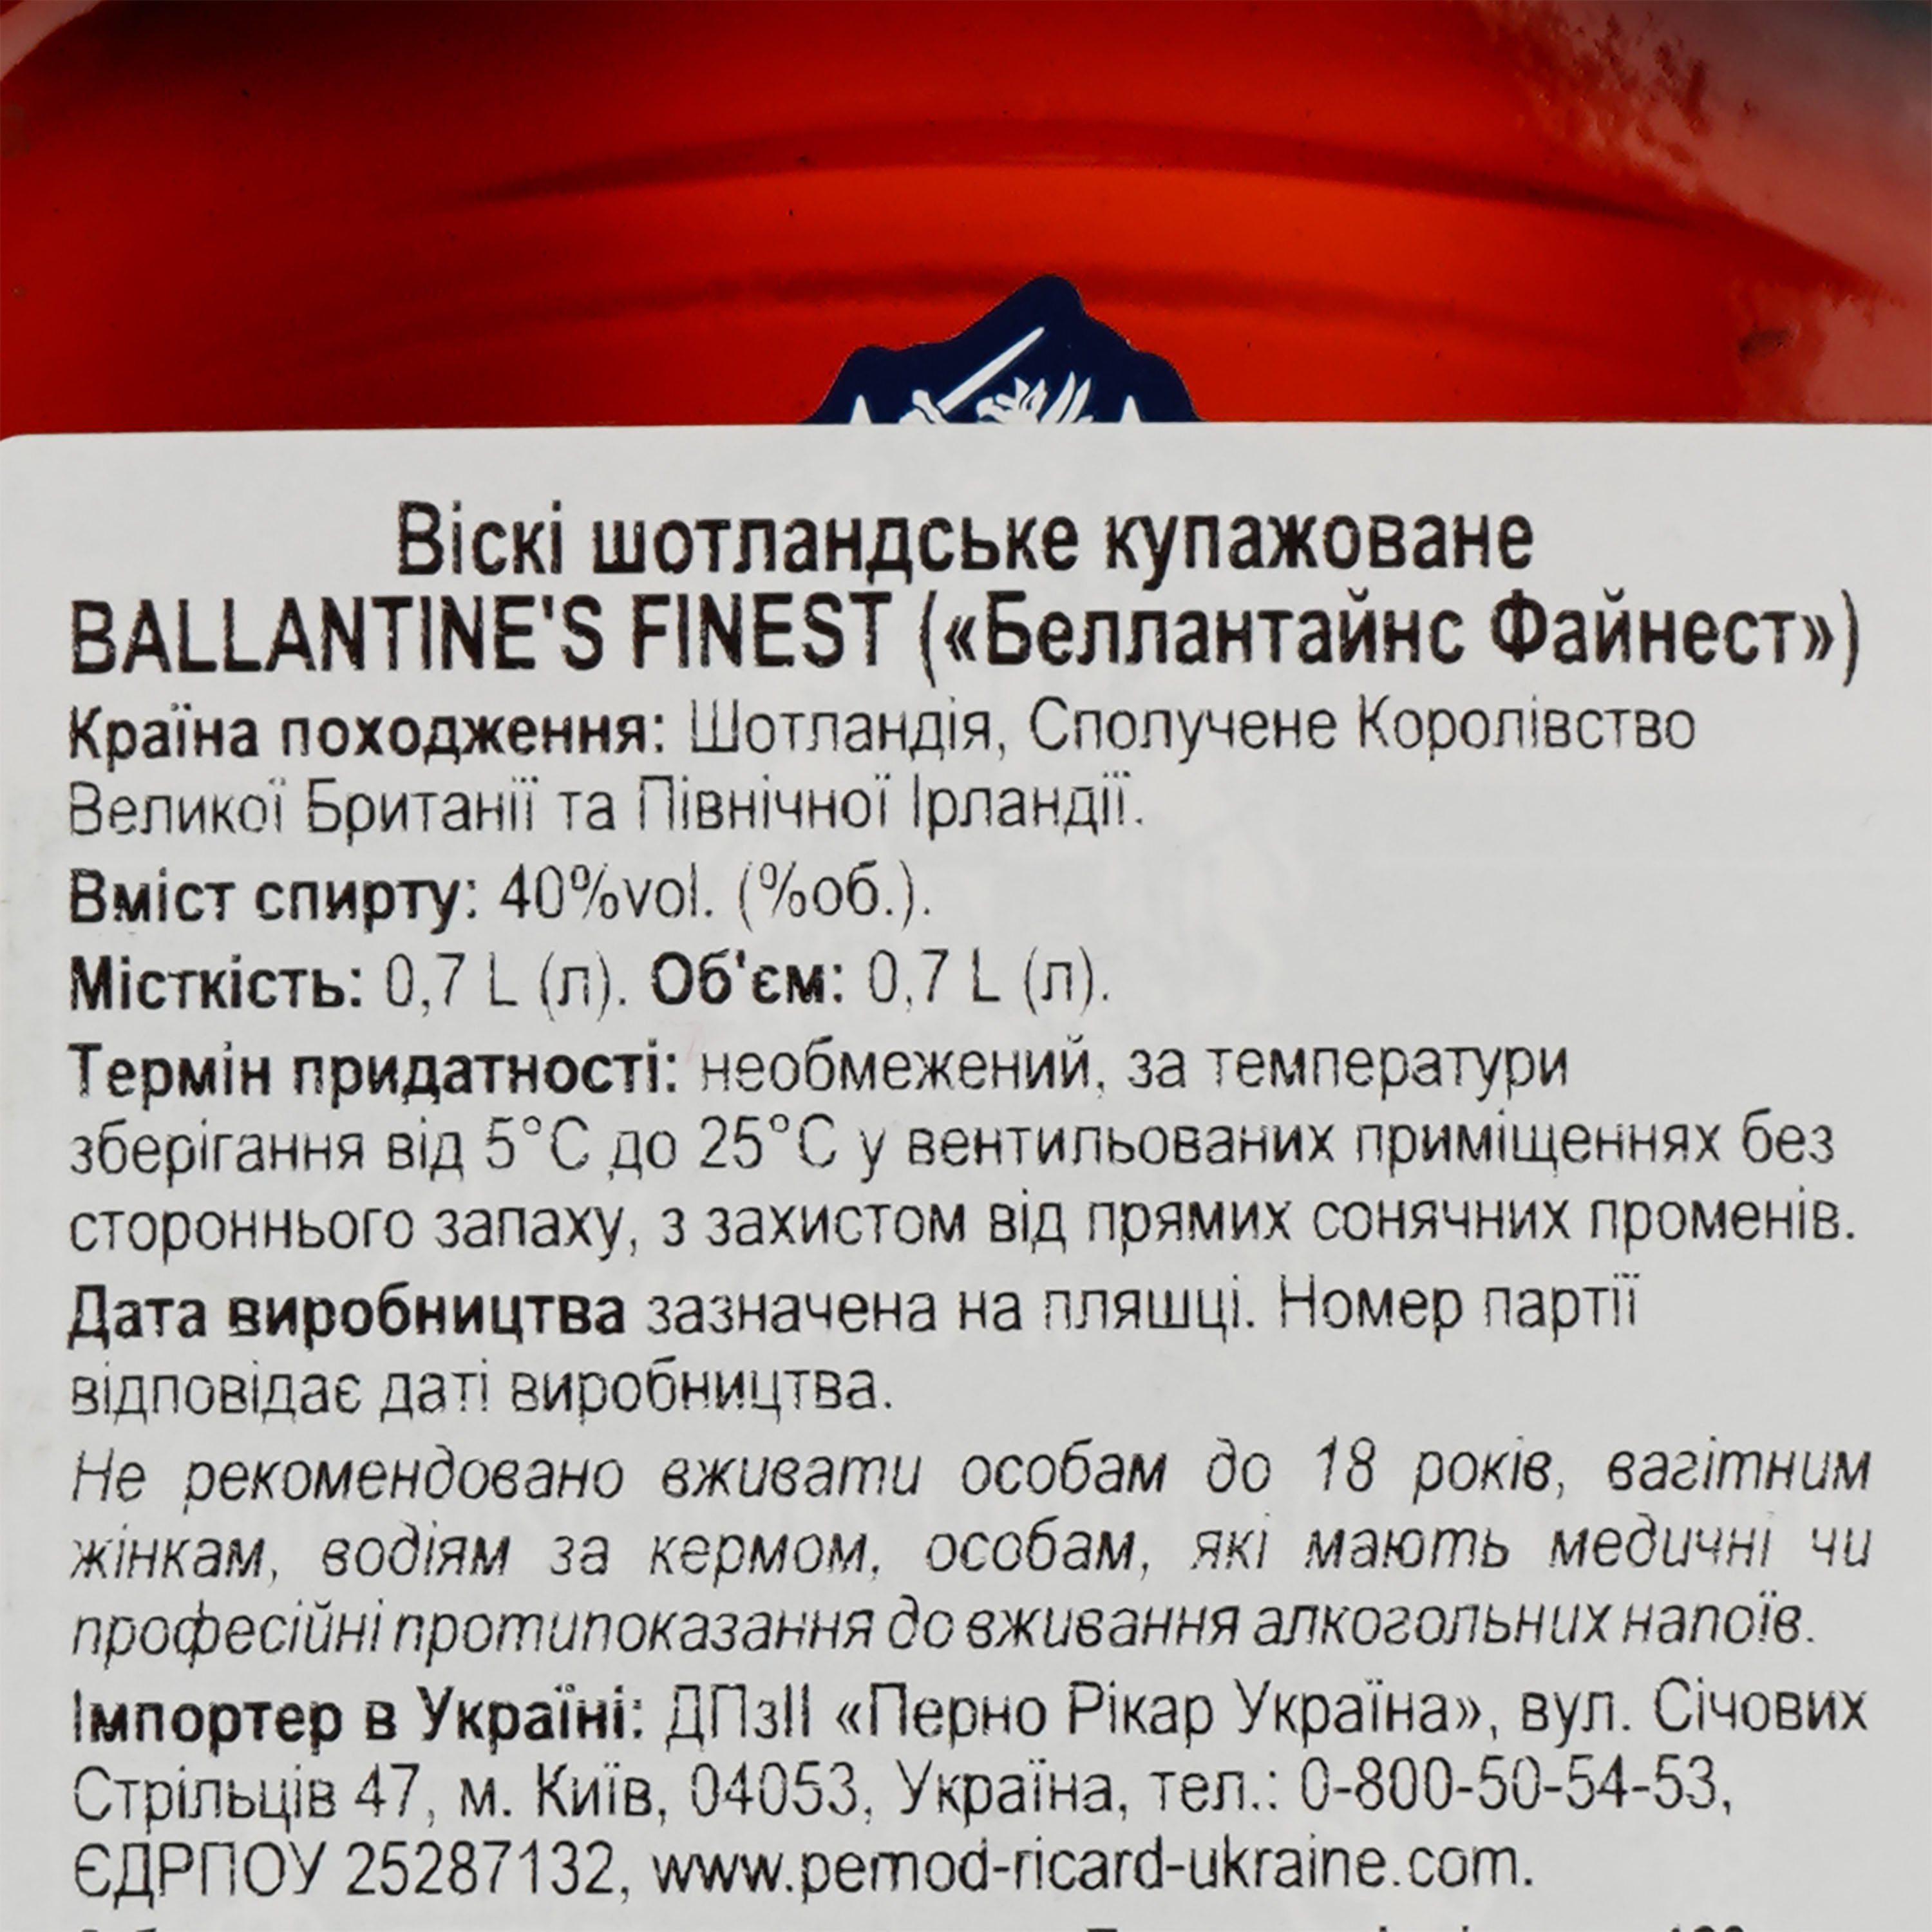 Виски Ballantine's Finest Queen Blended Scotch Whisky 40% 0.7л - фото 3